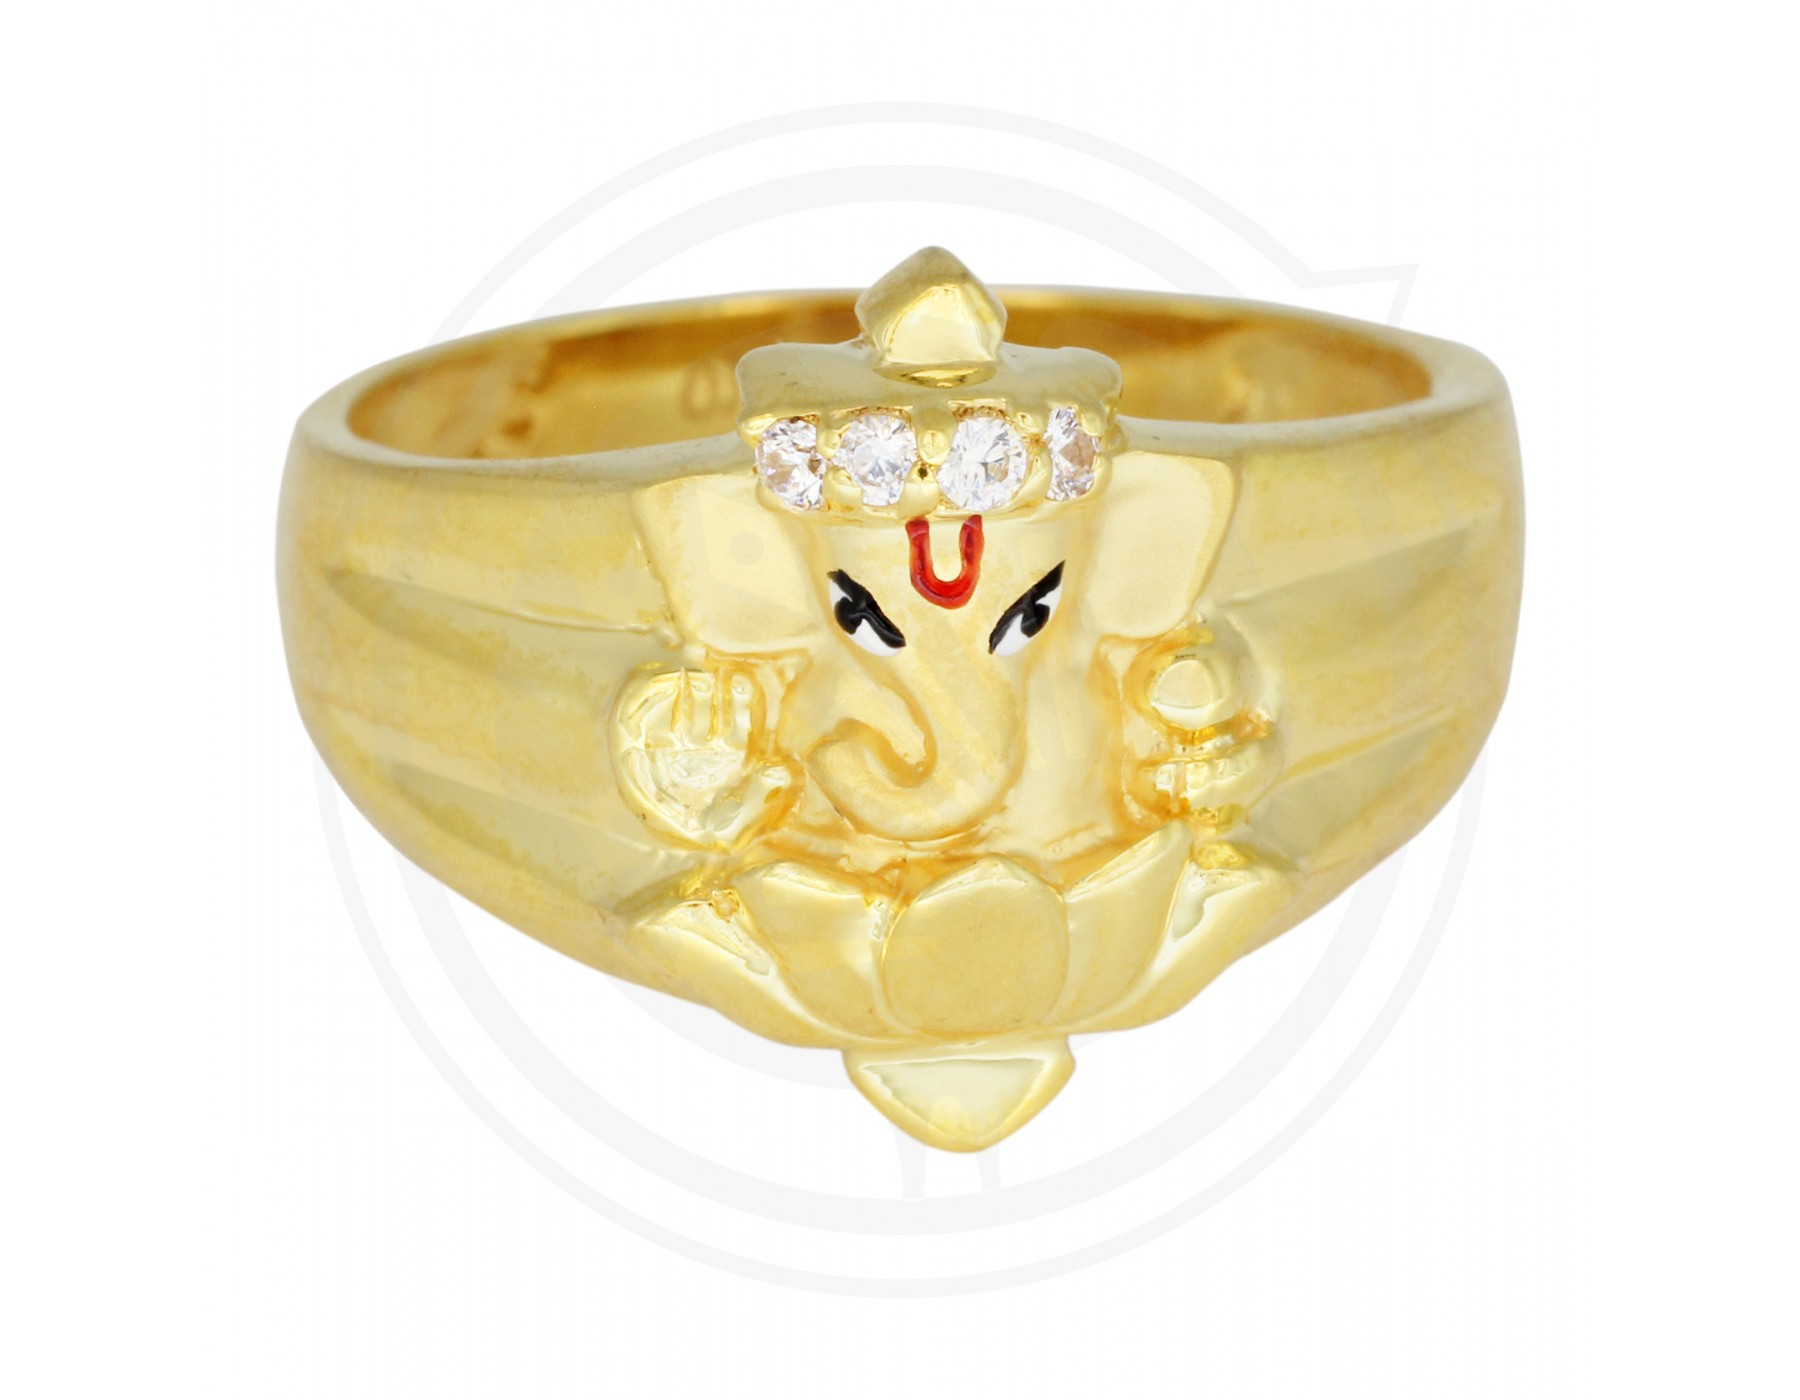 Buy quality 916 Gold Plane Ganesh Gents Ring in Ahmedabad